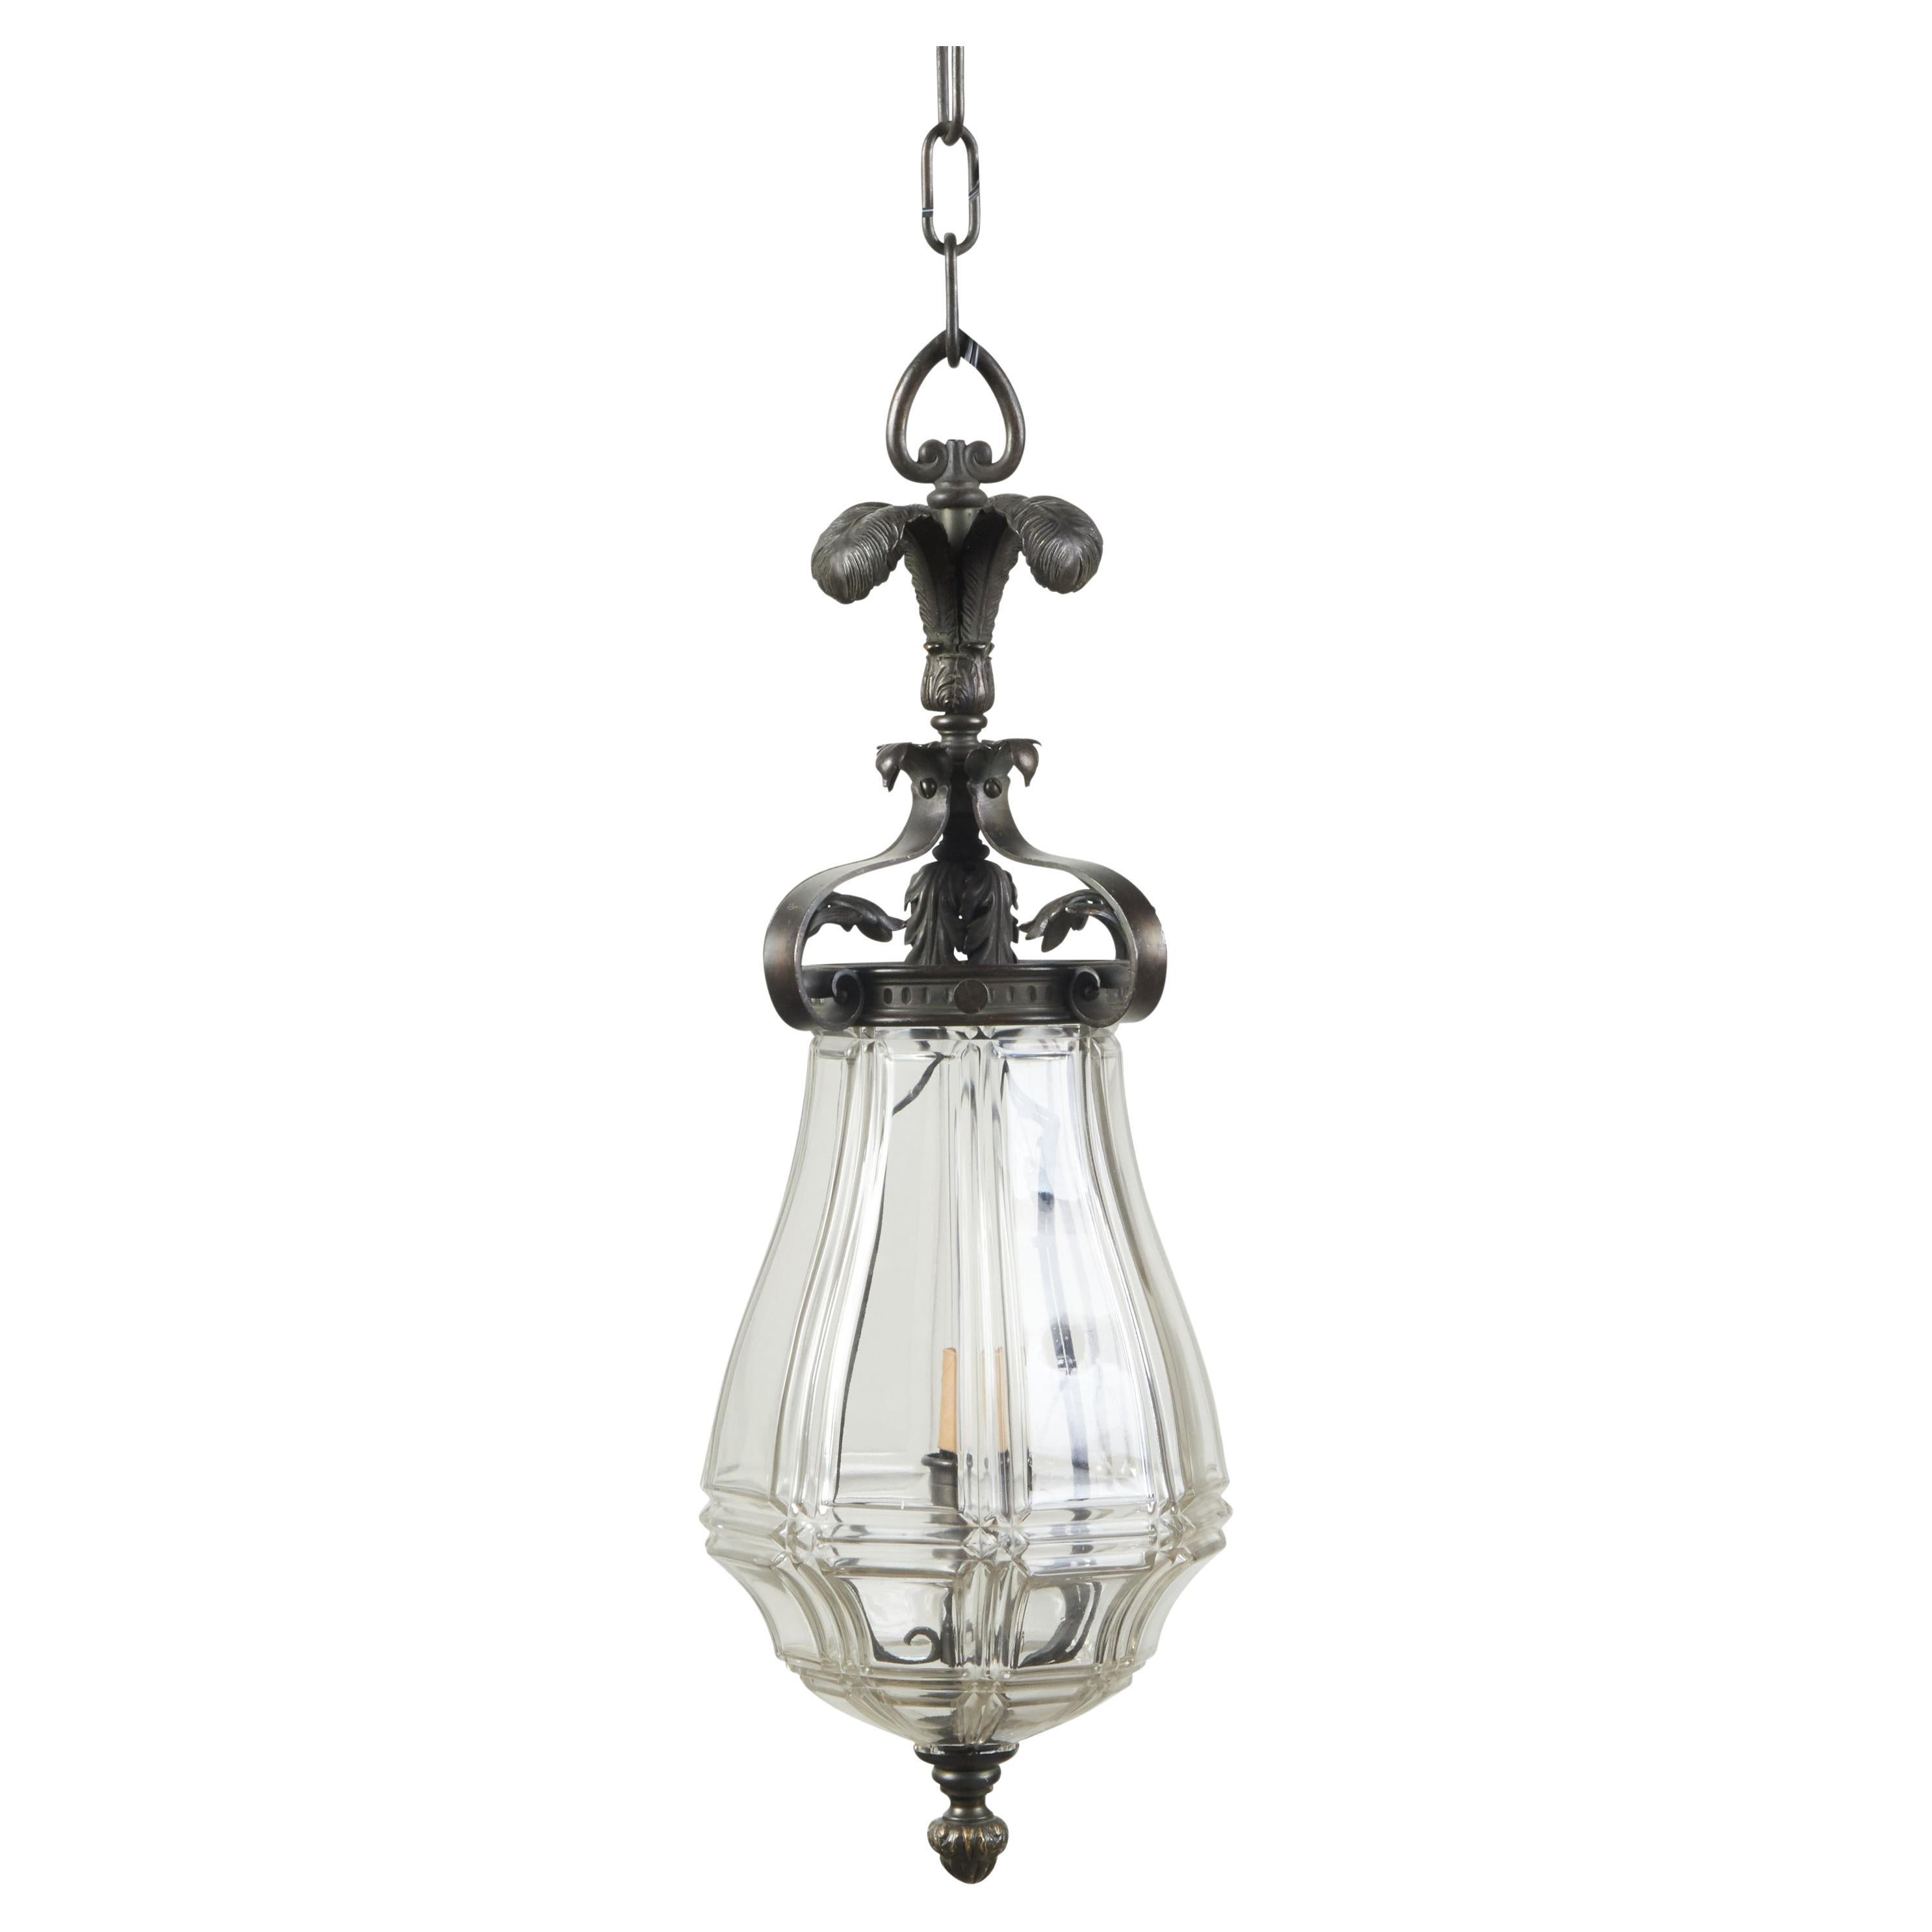 French 1920s Bronze and Glass Lantern with Feathers and Acanthus Leaves